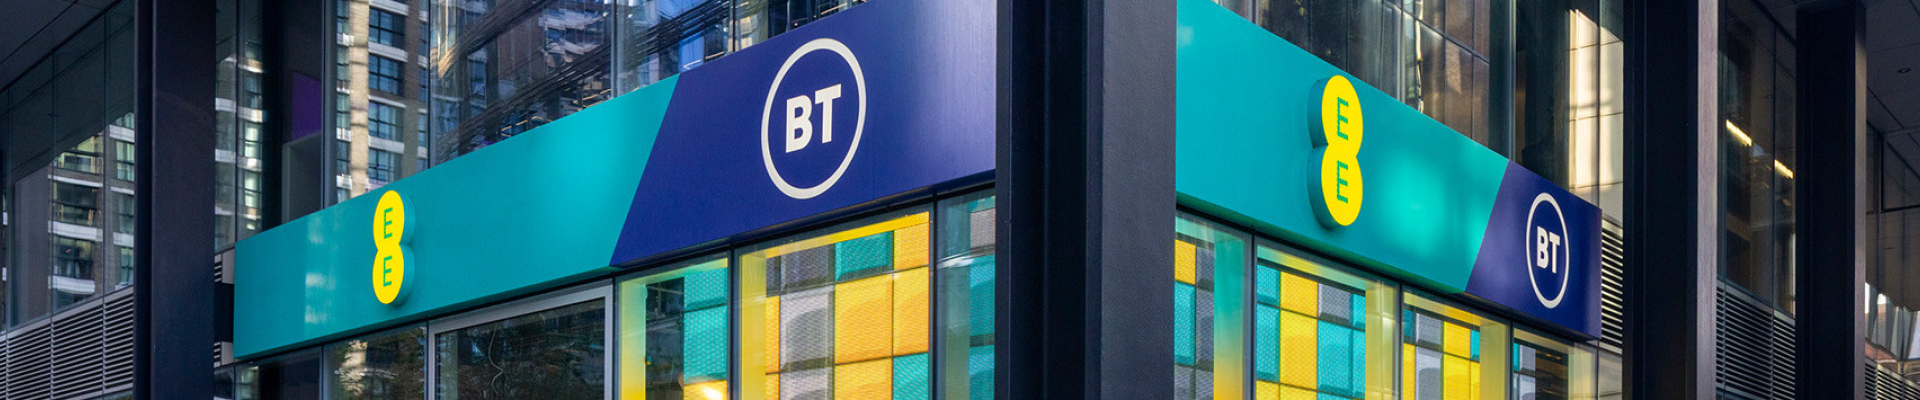 Global rebrand sign rollout across 207 sites for BT